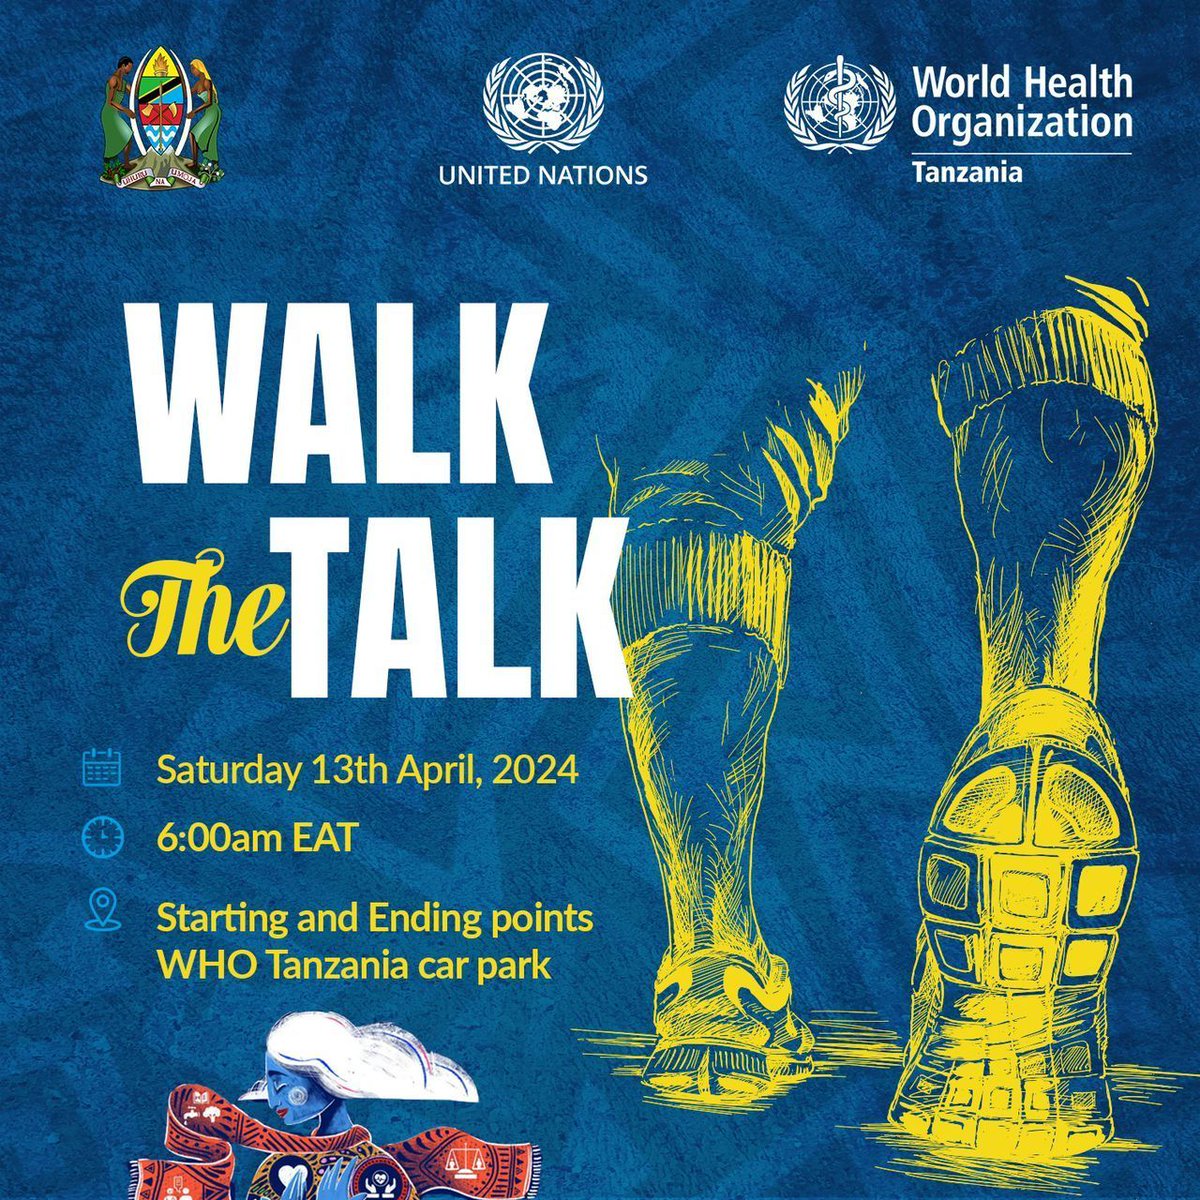 Walking, jogging, & more – people of all ages & abilities will be moving, & calling, better health. As part of #WorldHealthDay, Join @UnitedNationsTZ & partners in the Health for All Challenge & celebrate our shared commitment to get moving for physical & mental health.